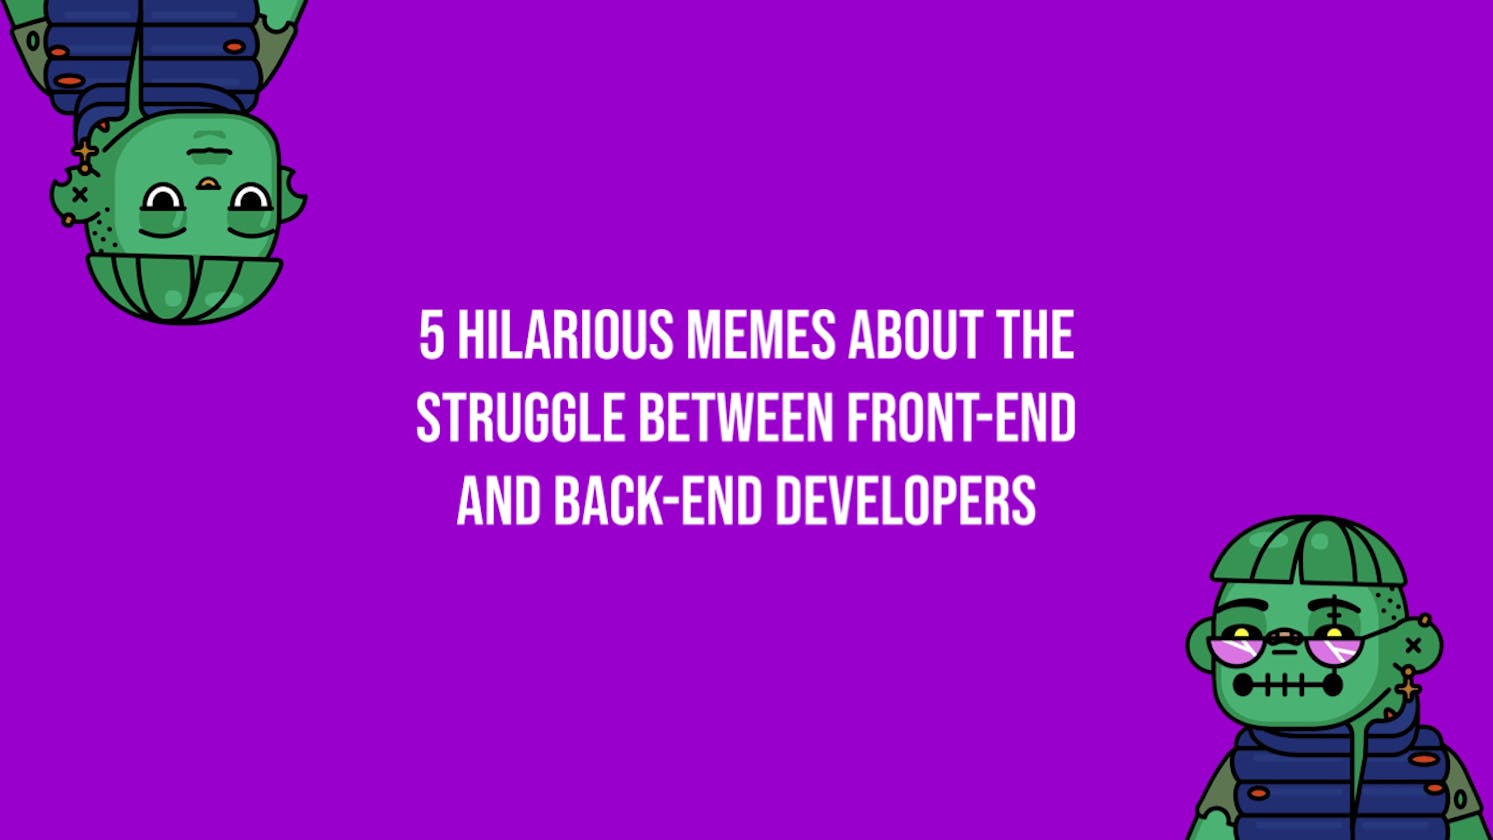 5 Hilarious Memes About The Struggle Between Front-End And Back-End Developers